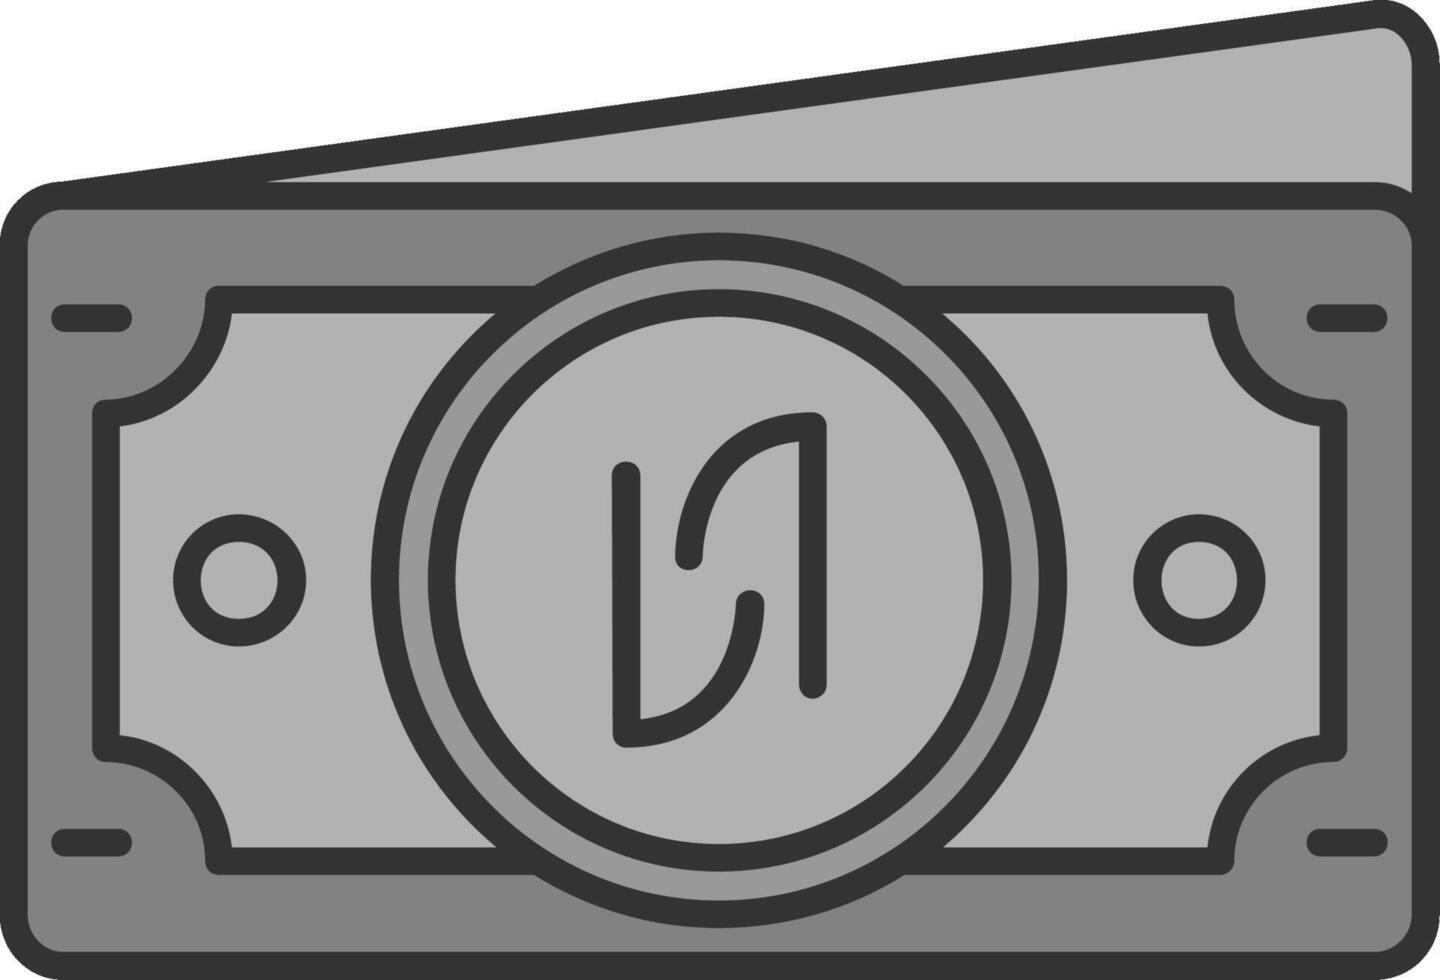 Shekel Line Filled Greyscale Icon vector